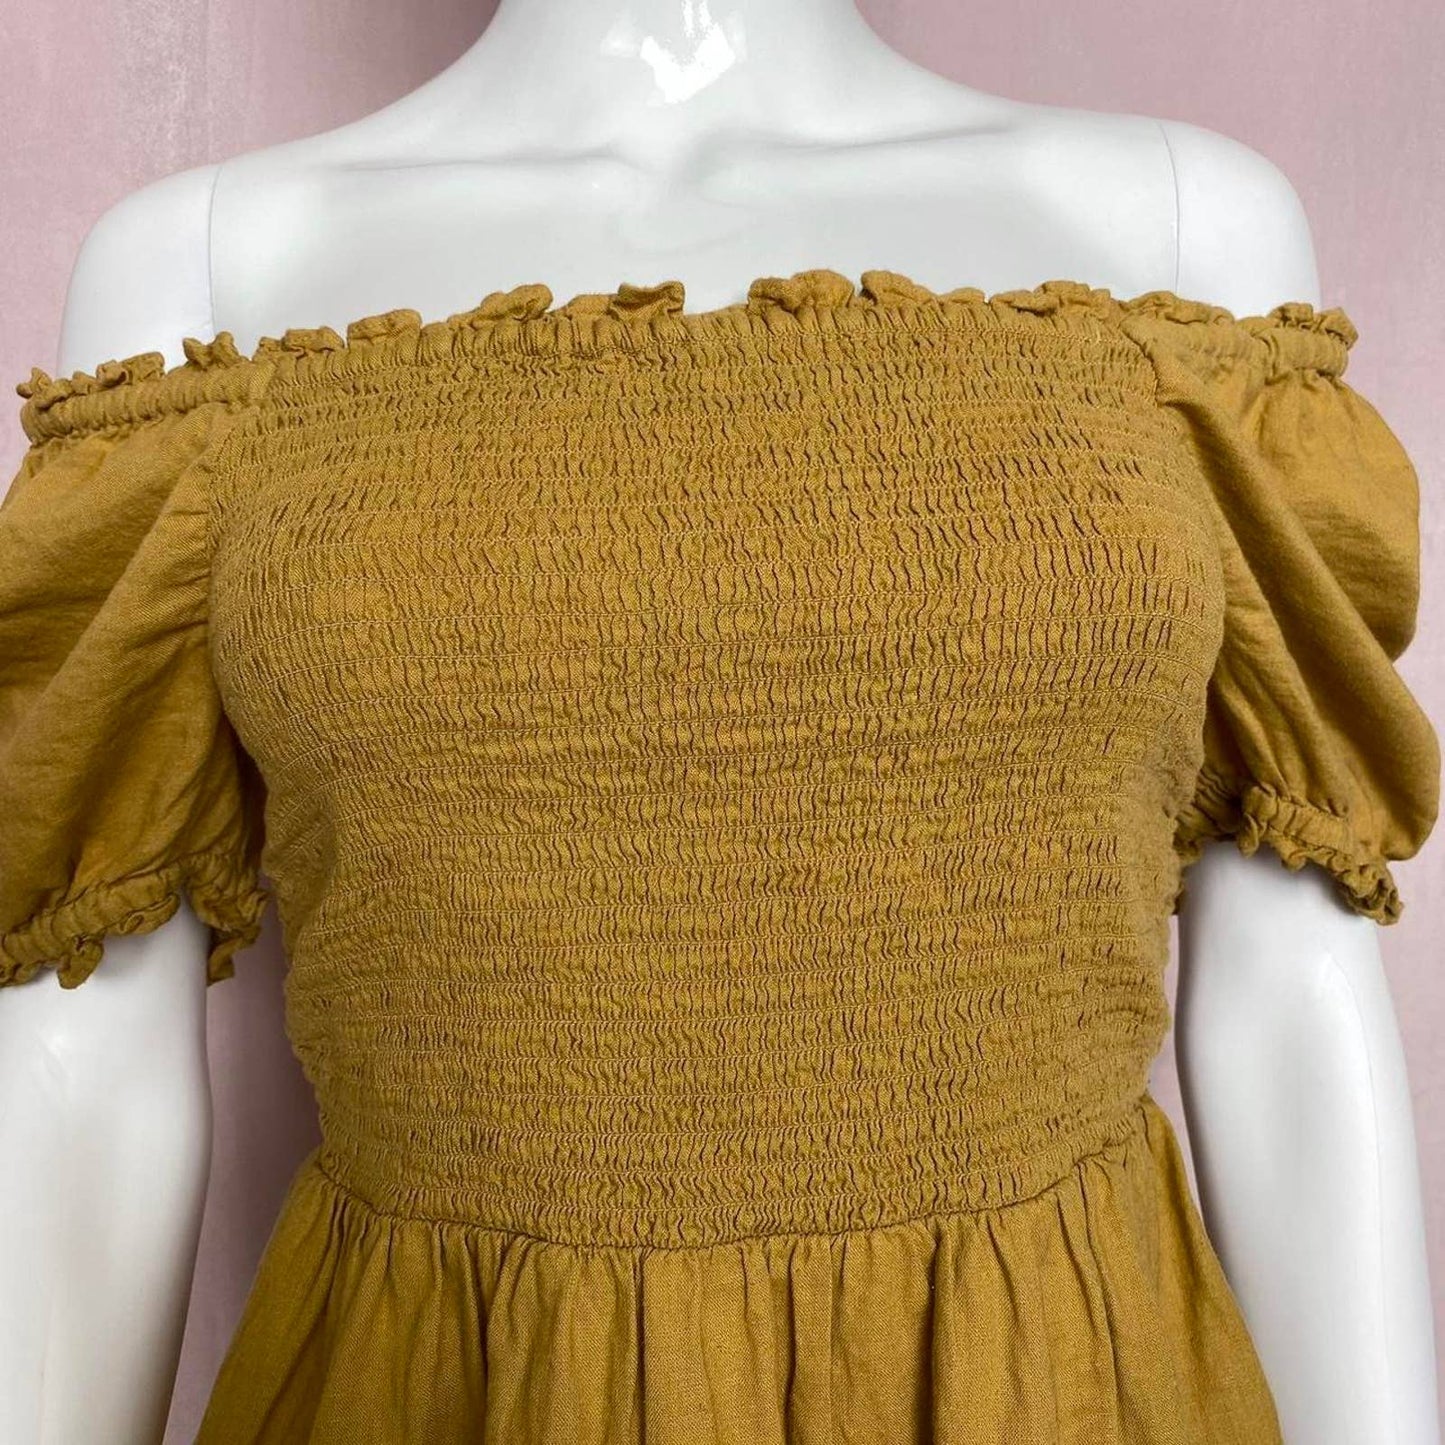 Secondhand Old Navy Mustard Smocked Puff Sleeve Top, Size Small